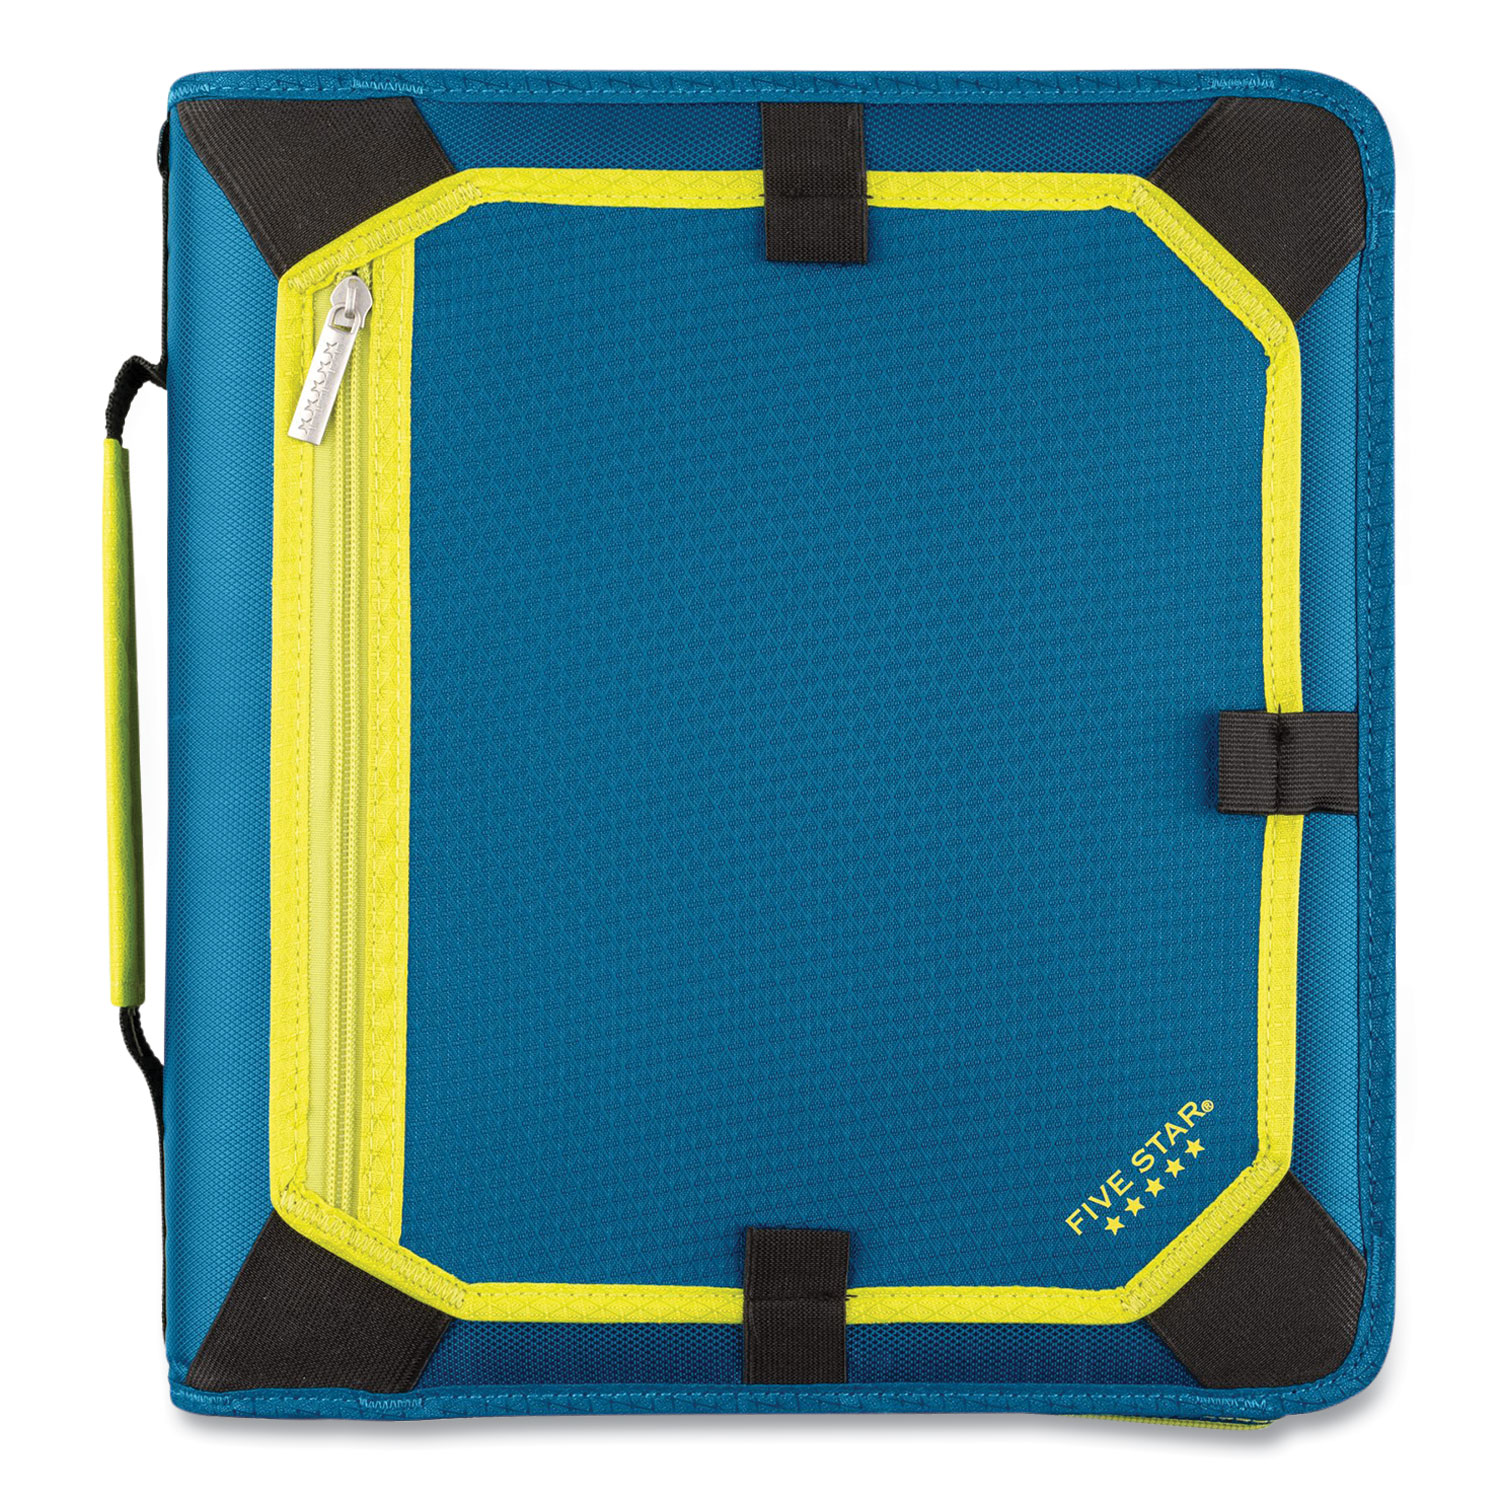 Five Star® Zipper Binder, 3 Rings, 2 Capacity, 11 x 8.5, Teal/Yellow Accents